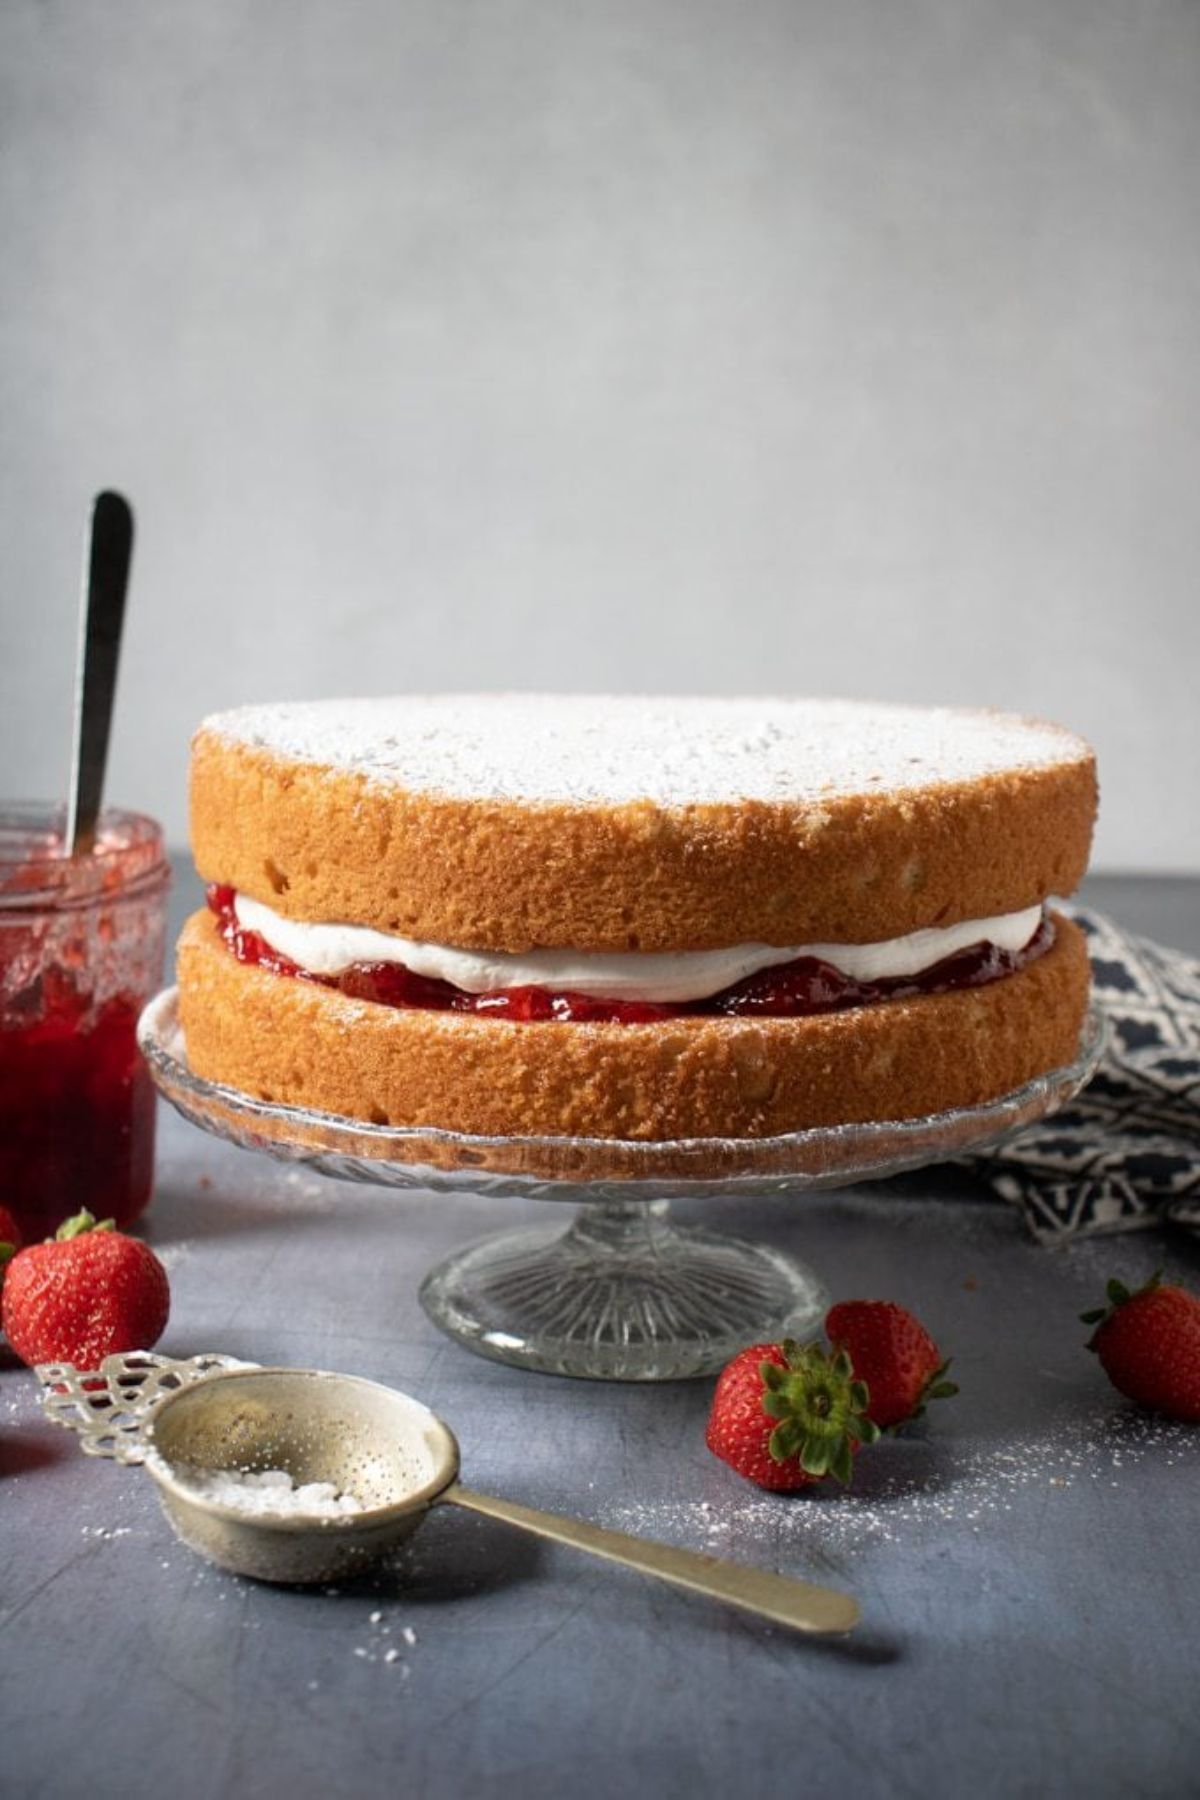 on a glass cake stand is a victoria sponge cake, dusted with icing sugar and filled with cream and straberery jam